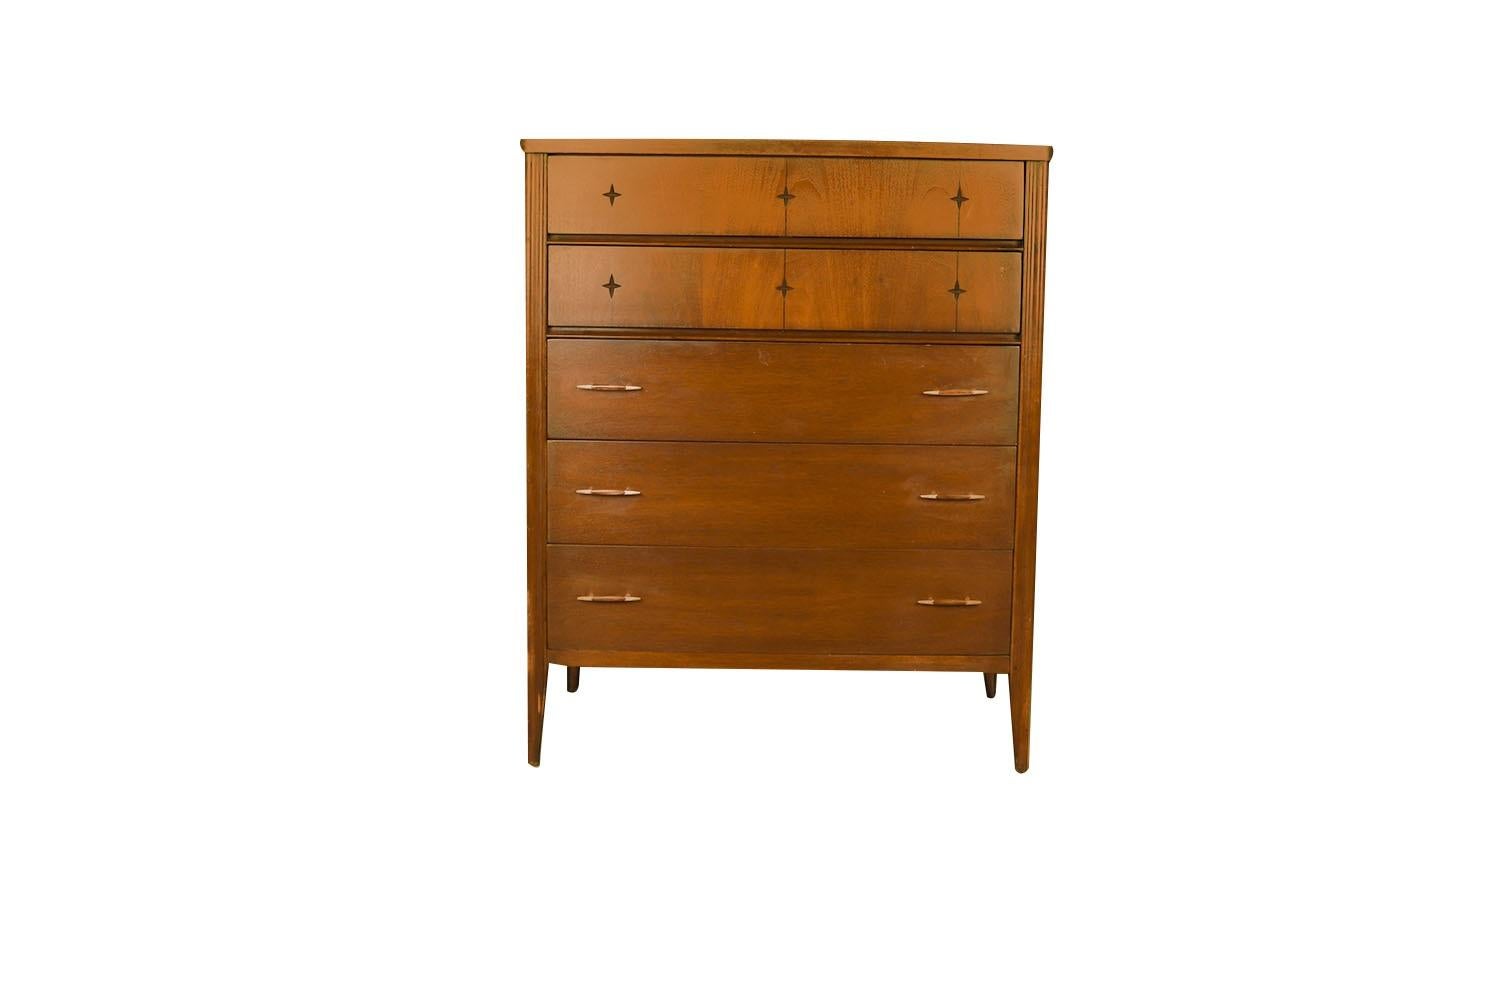 A beautiful, sleek mid-century modern walnut, Highboy Dresser circa early 1960’s from Broyhill Premier’s “Saga” collection. This absolute jewel remains in nearly pristine condition. The lines are clean and elegant. Features five spacious drawers